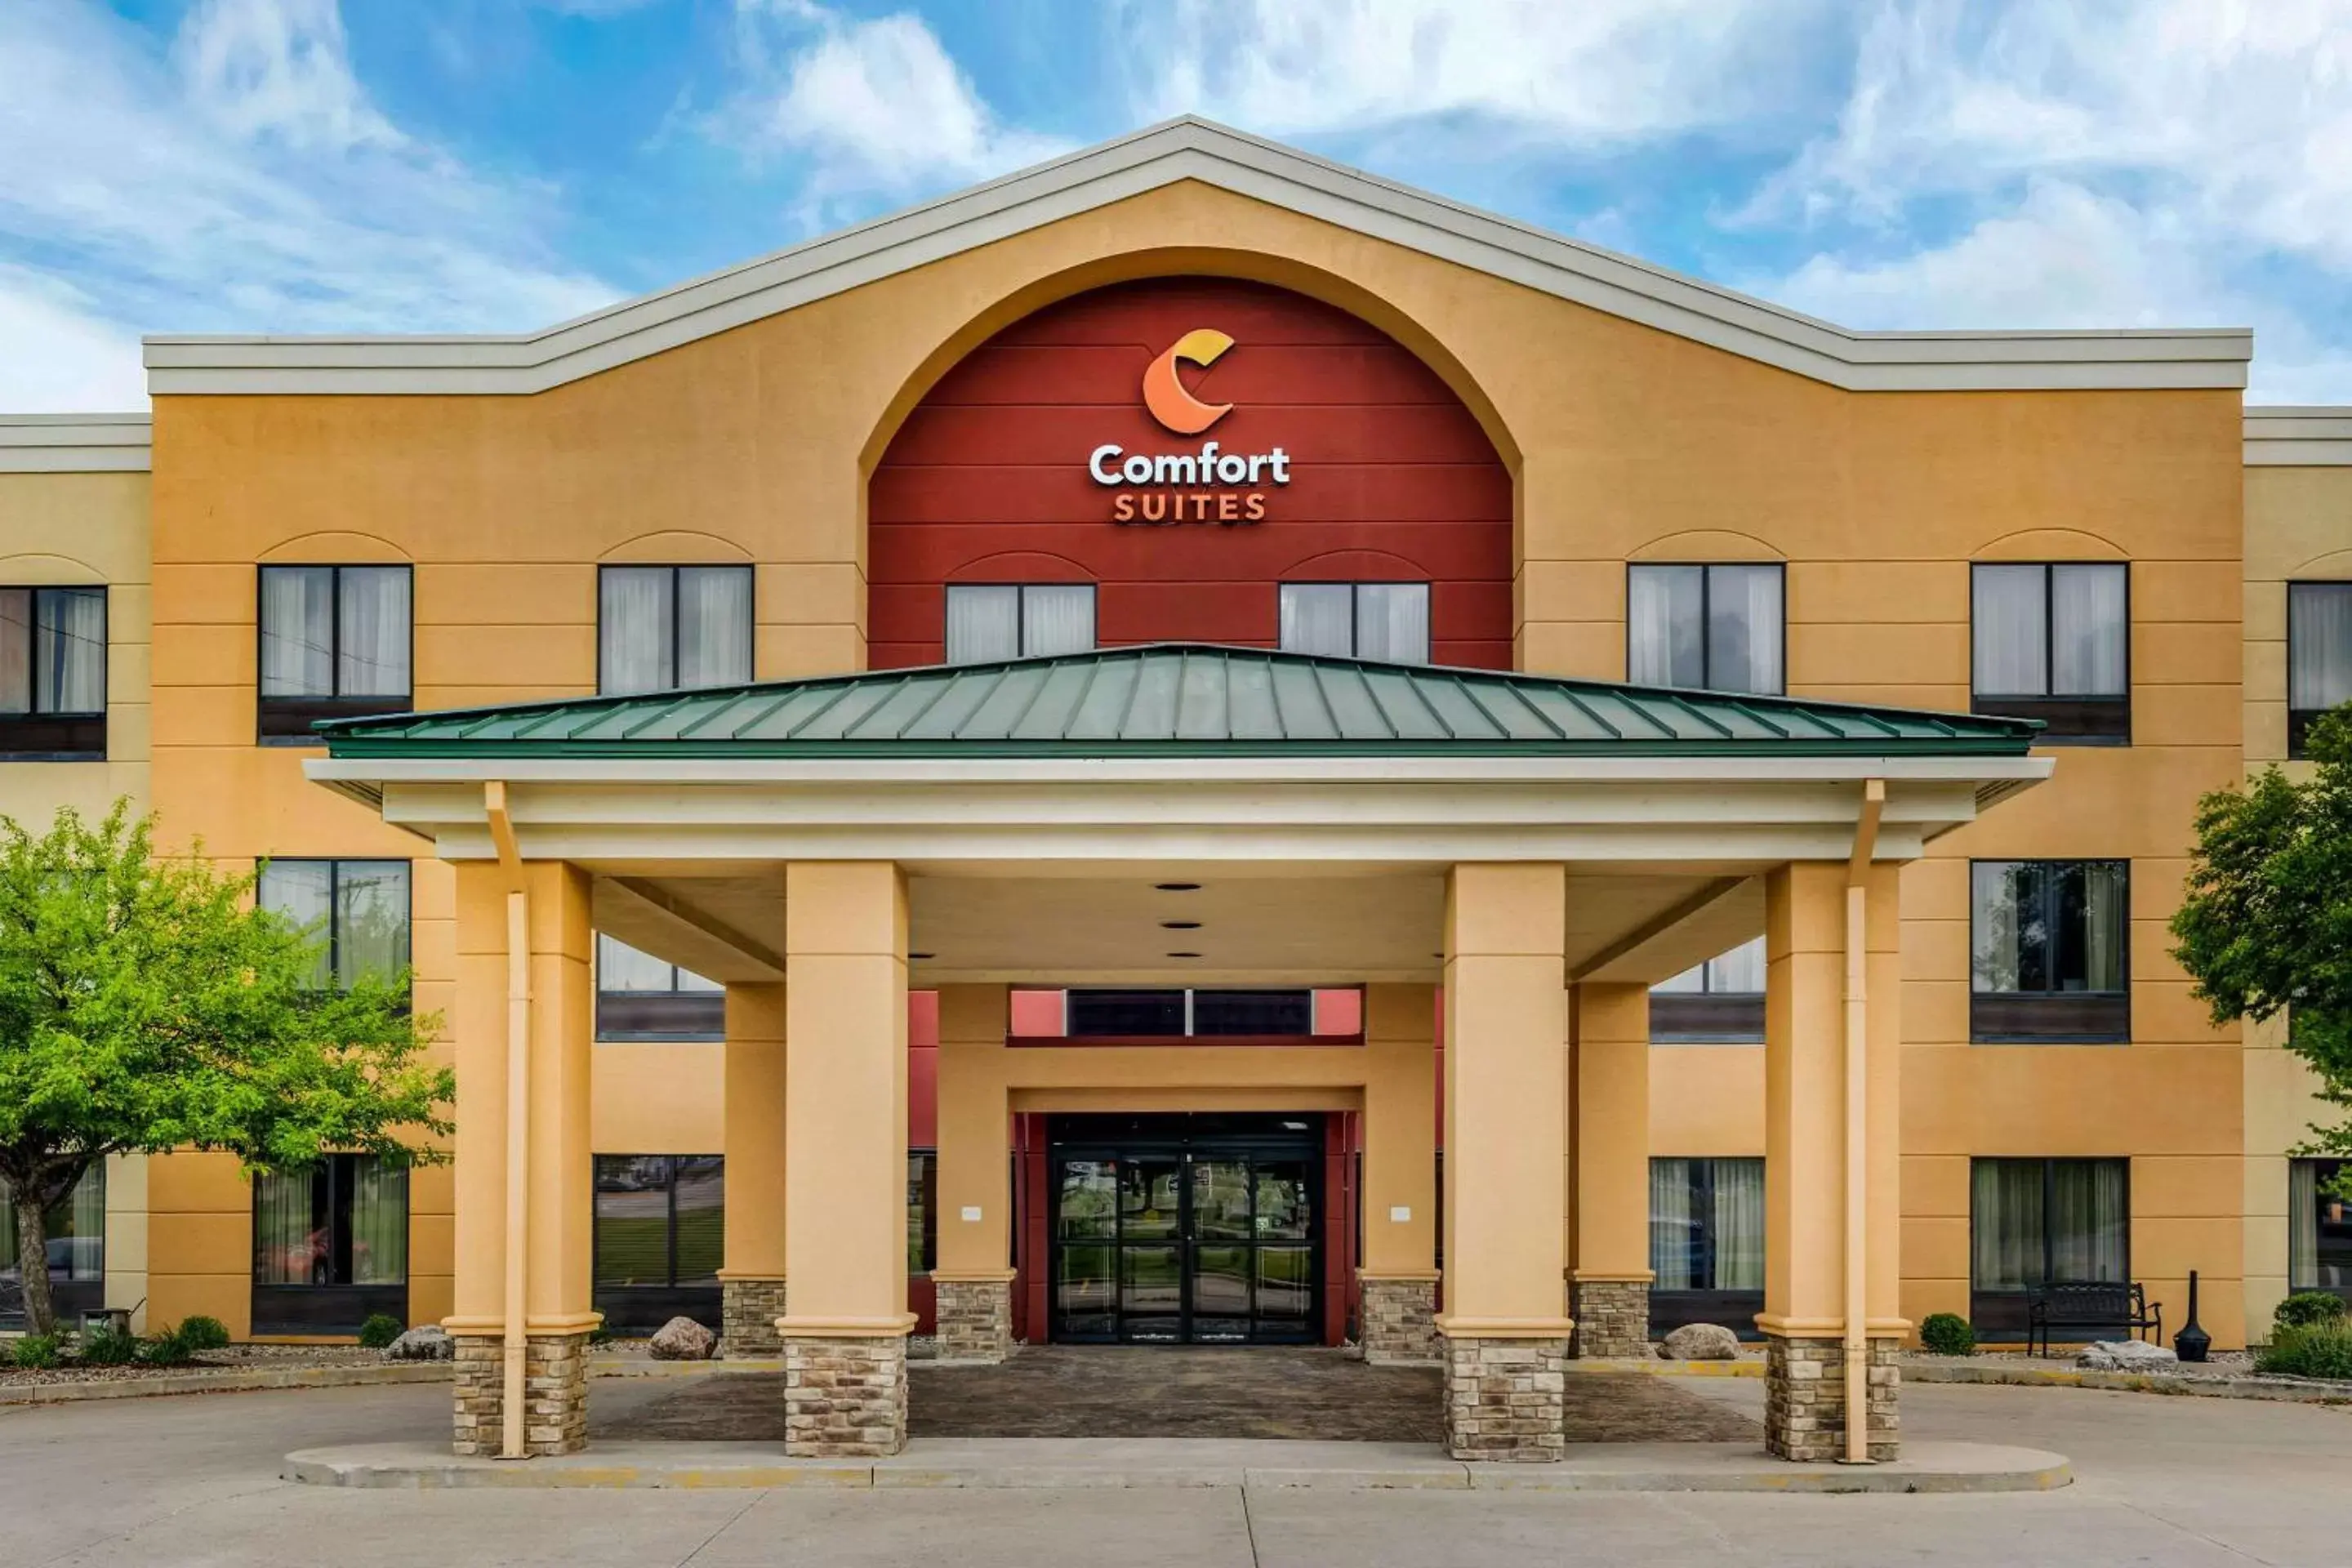 Property Building in Comfort Suites near Route 66